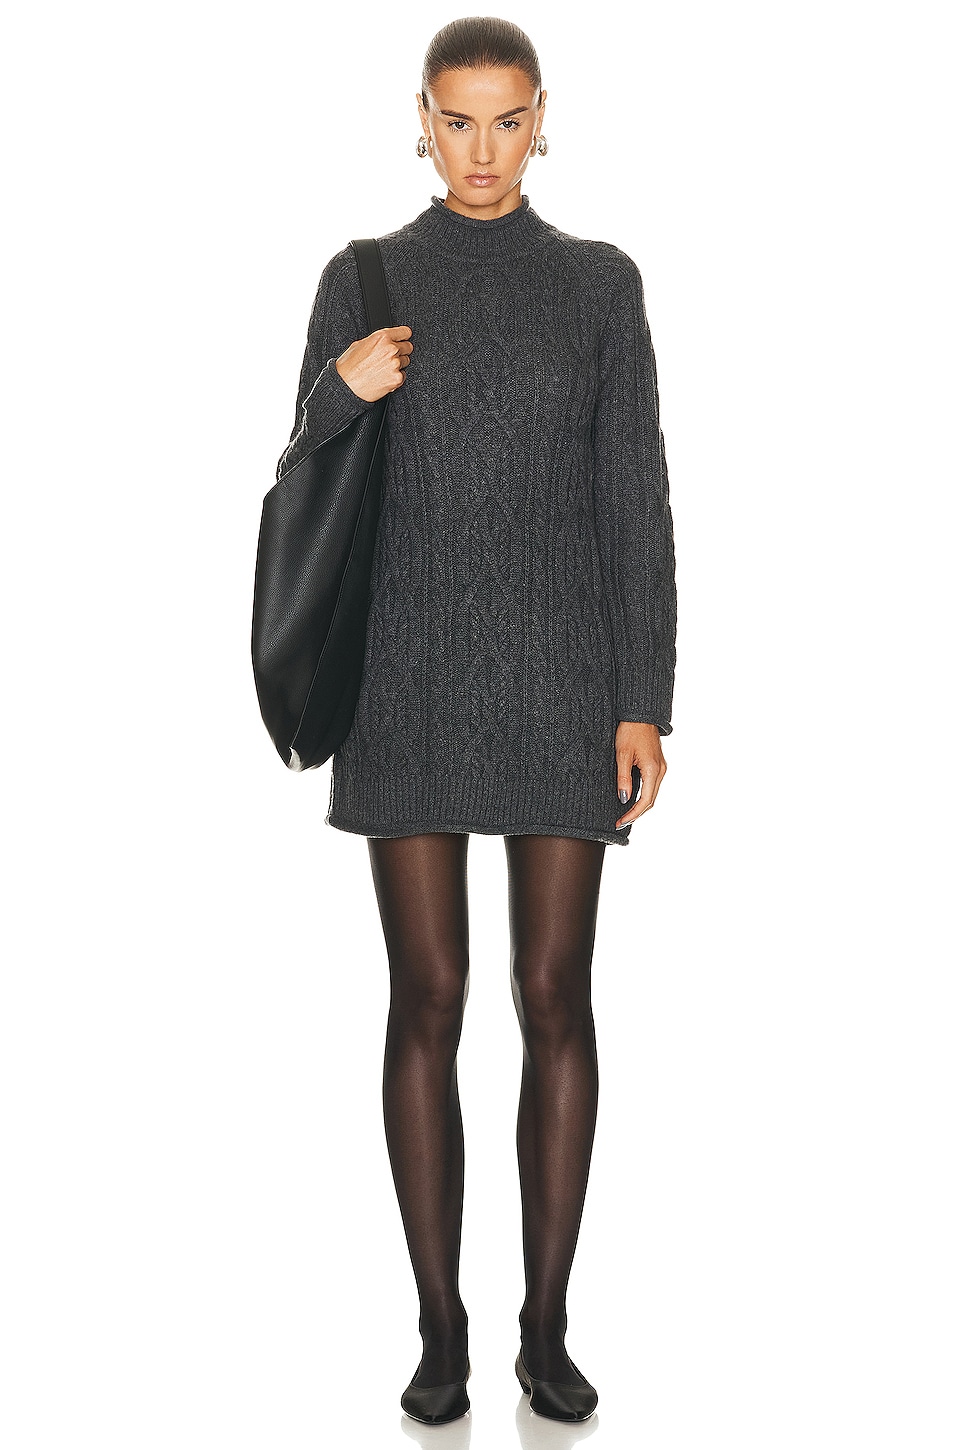 Image 1 of Loulou Studio Layo Turtleneck Cable Knit Dress in Anthracite Melange